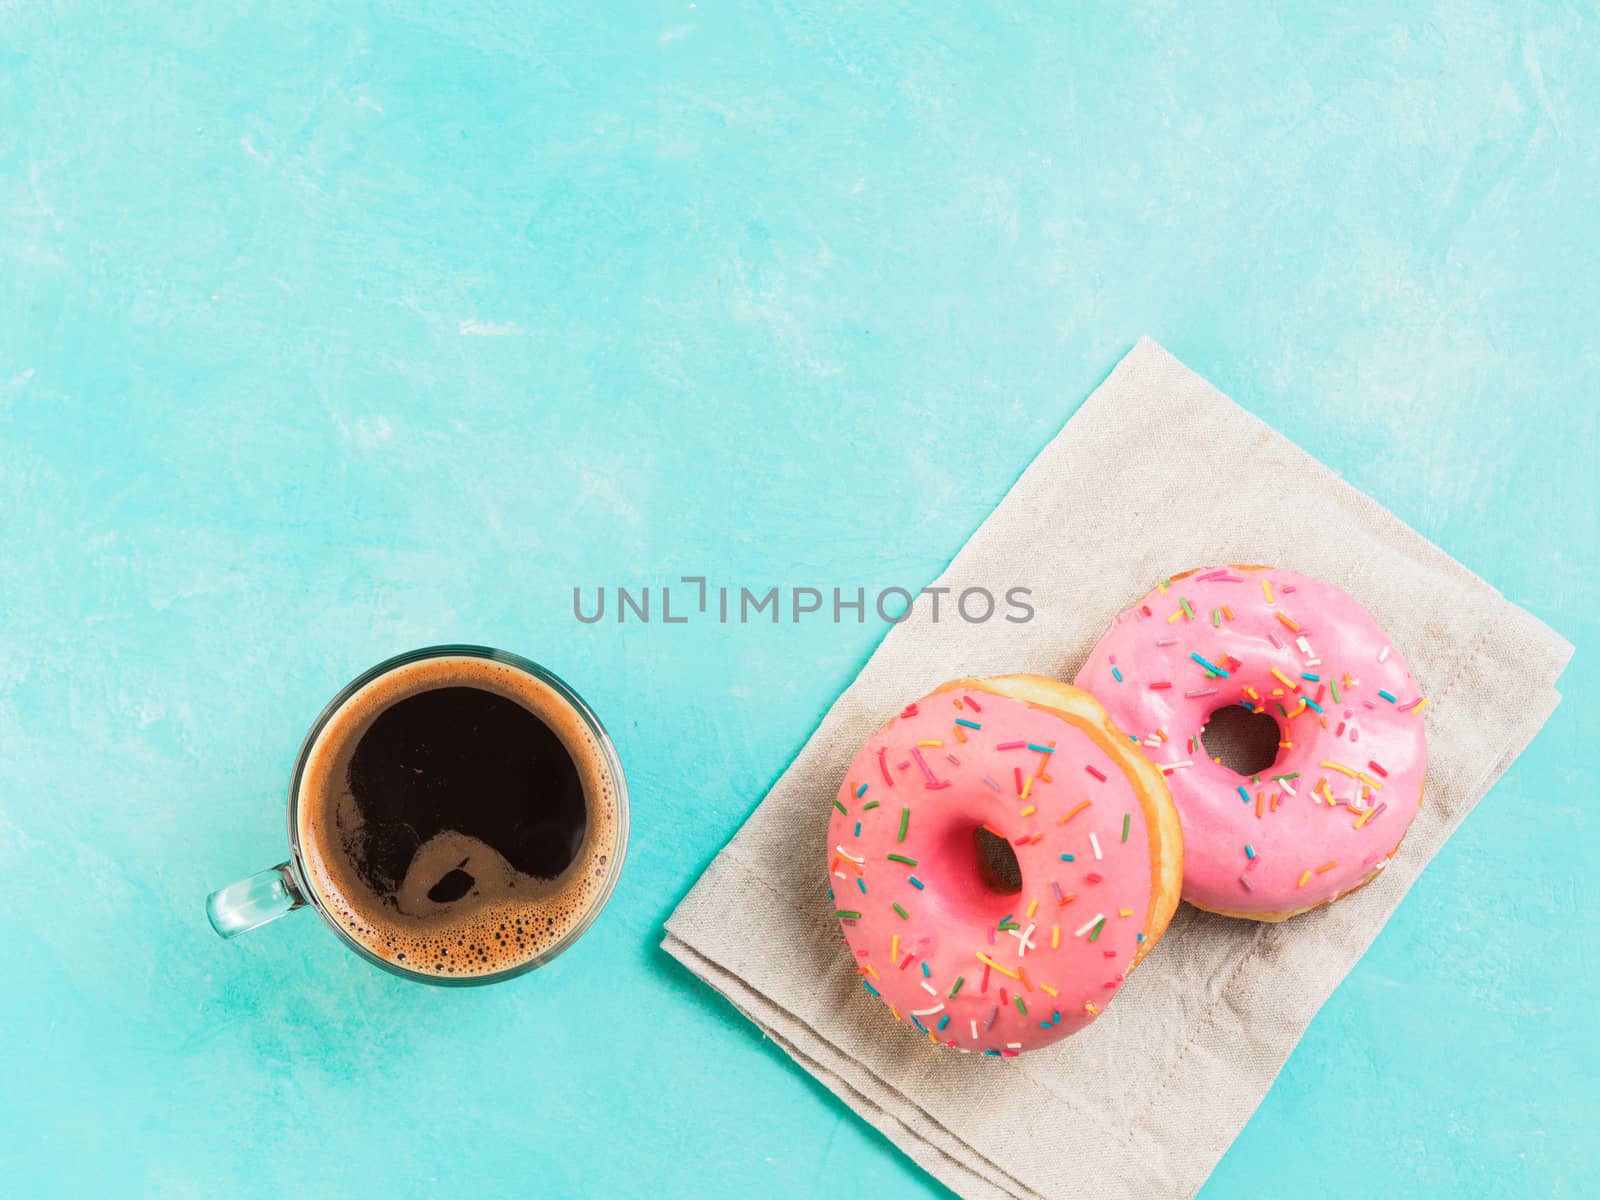 Top view of two pink donuts and coffee on blue concrete background with copy space. Colorful donuts and coffee cup with copyspace. Glazed doughnuts with sprinkles